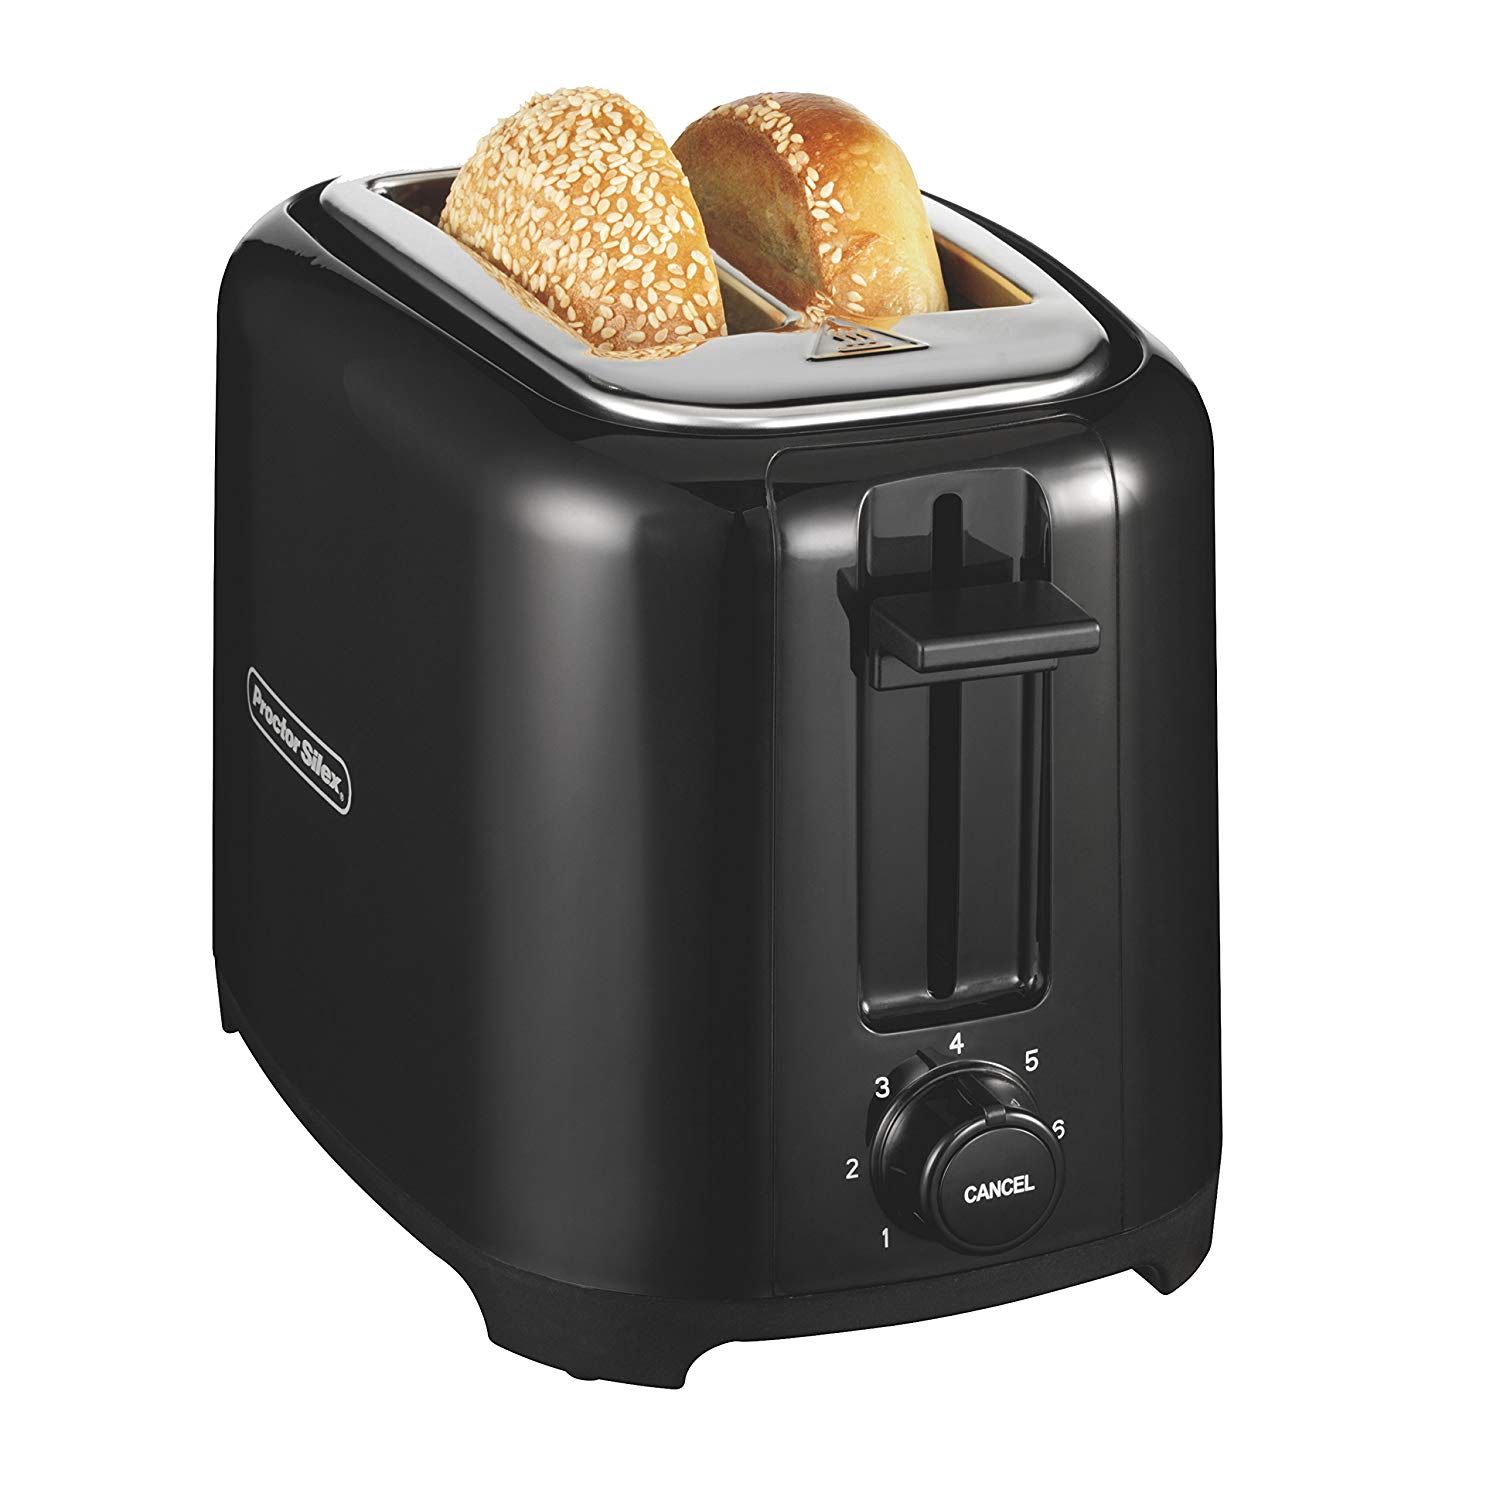 Proctor Silex 22215 Toaster with Wide Slots & Toast Boost, 2-Slice, Black